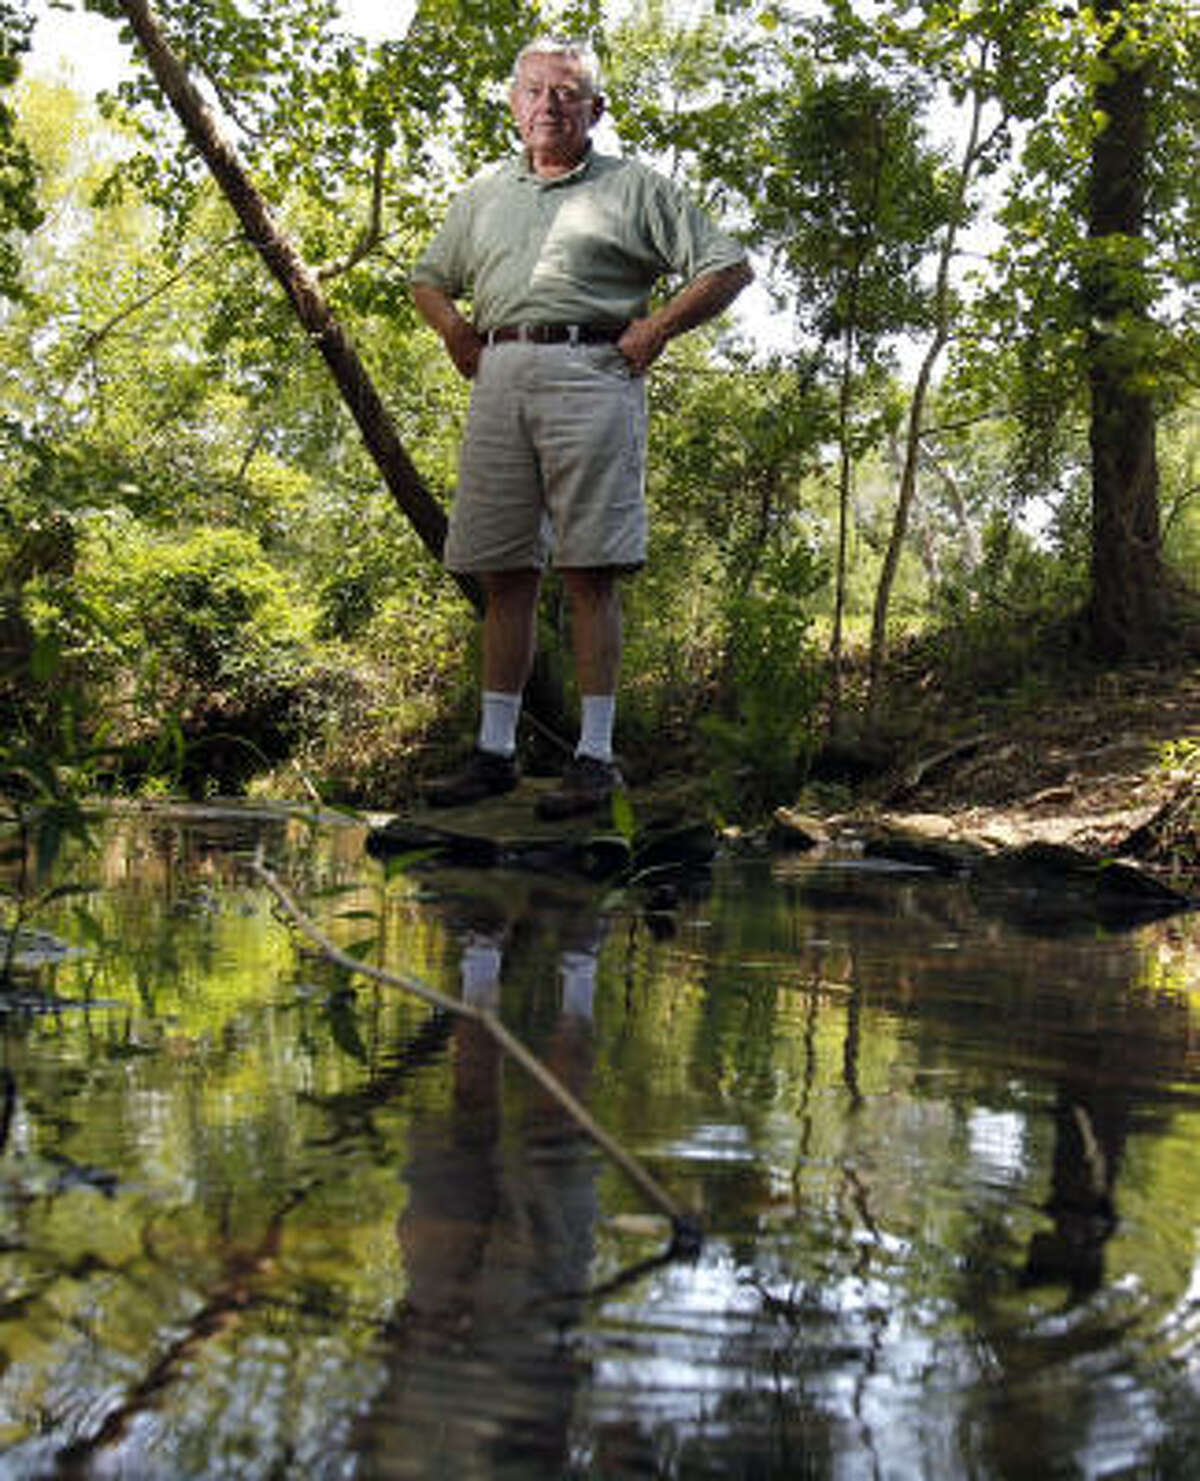 Tom Brown retired to 30 acres along Clear Creek in Waller County. His worry: "If this landfill goes in, it will all change."